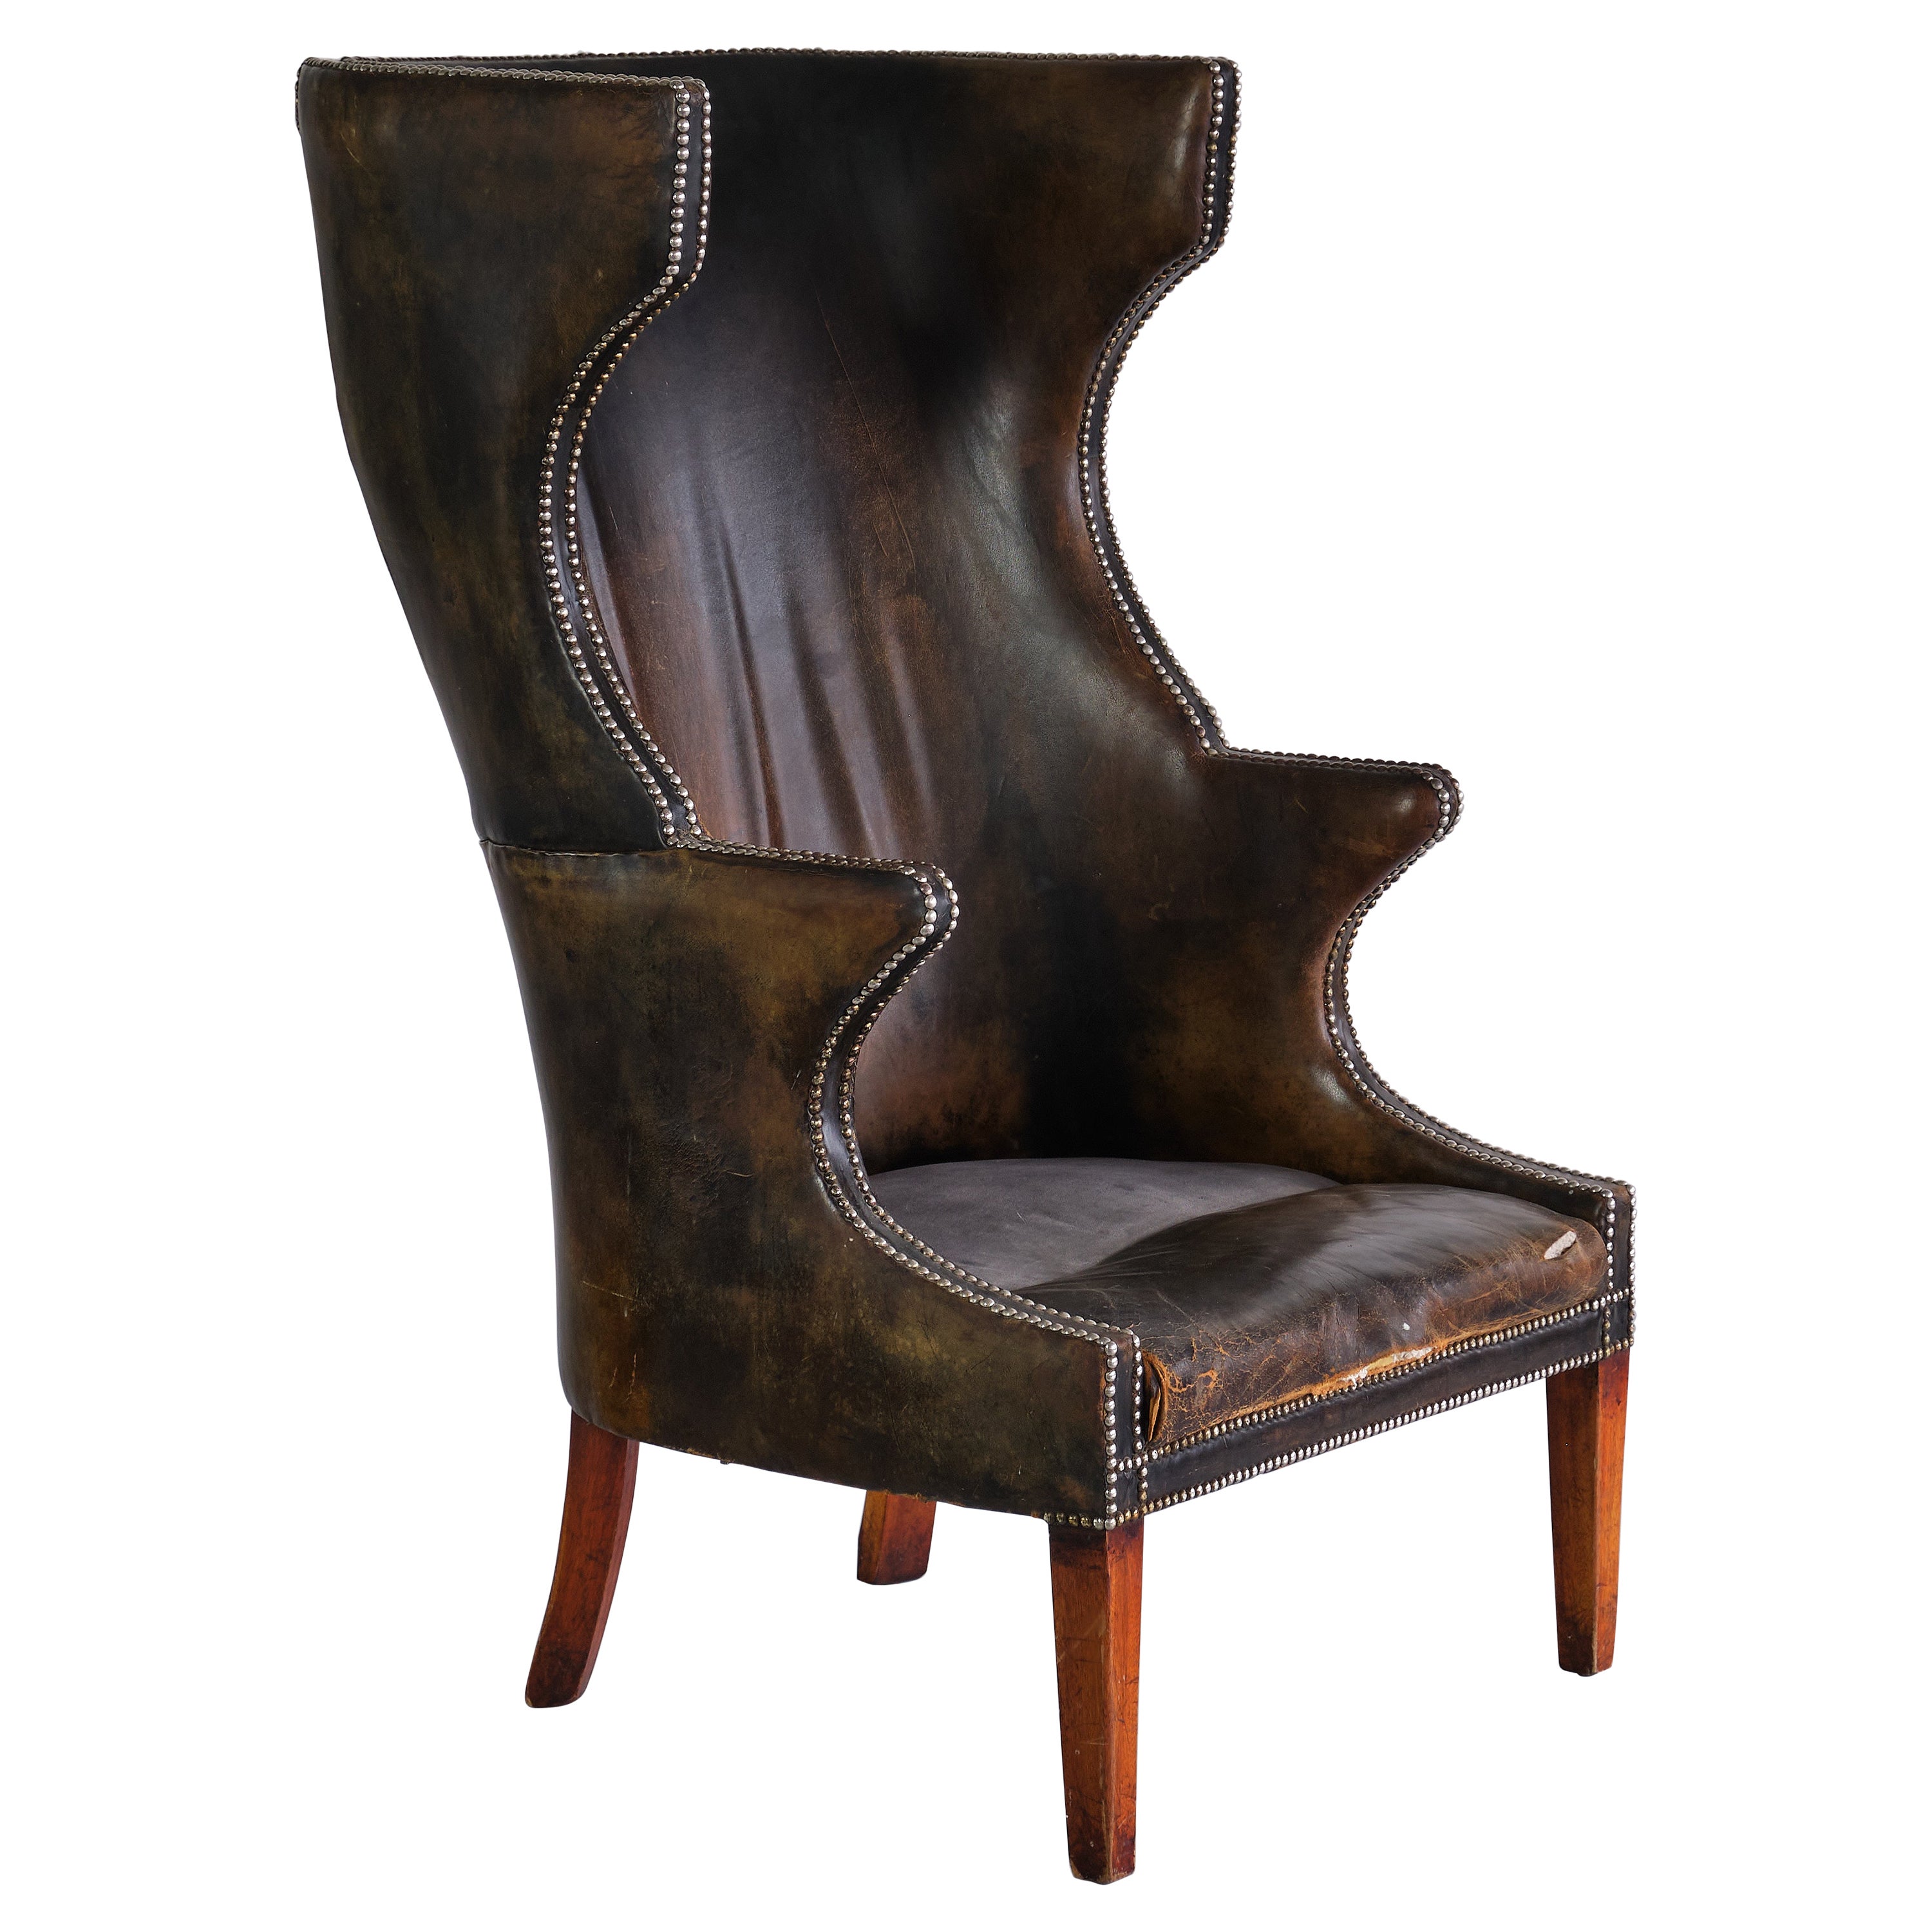 Exceptional Danish Cabinetmaker Wingback Chair in Leather and Beech, 1930s